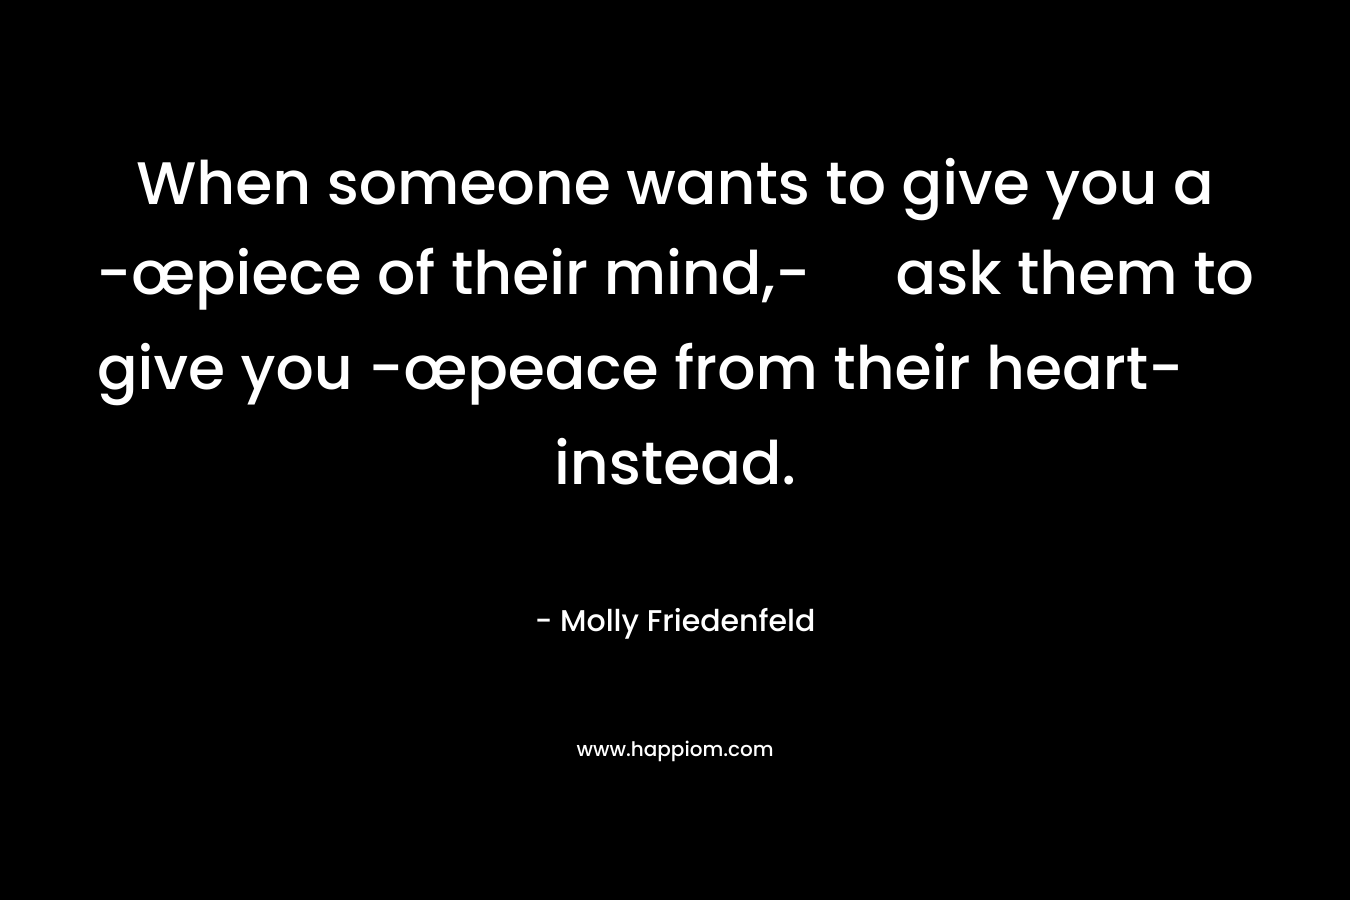 When someone wants to give you a -œpiece of their mind,- ask them to give you -œpeace from their heart- instead. – Molly Friedenfeld